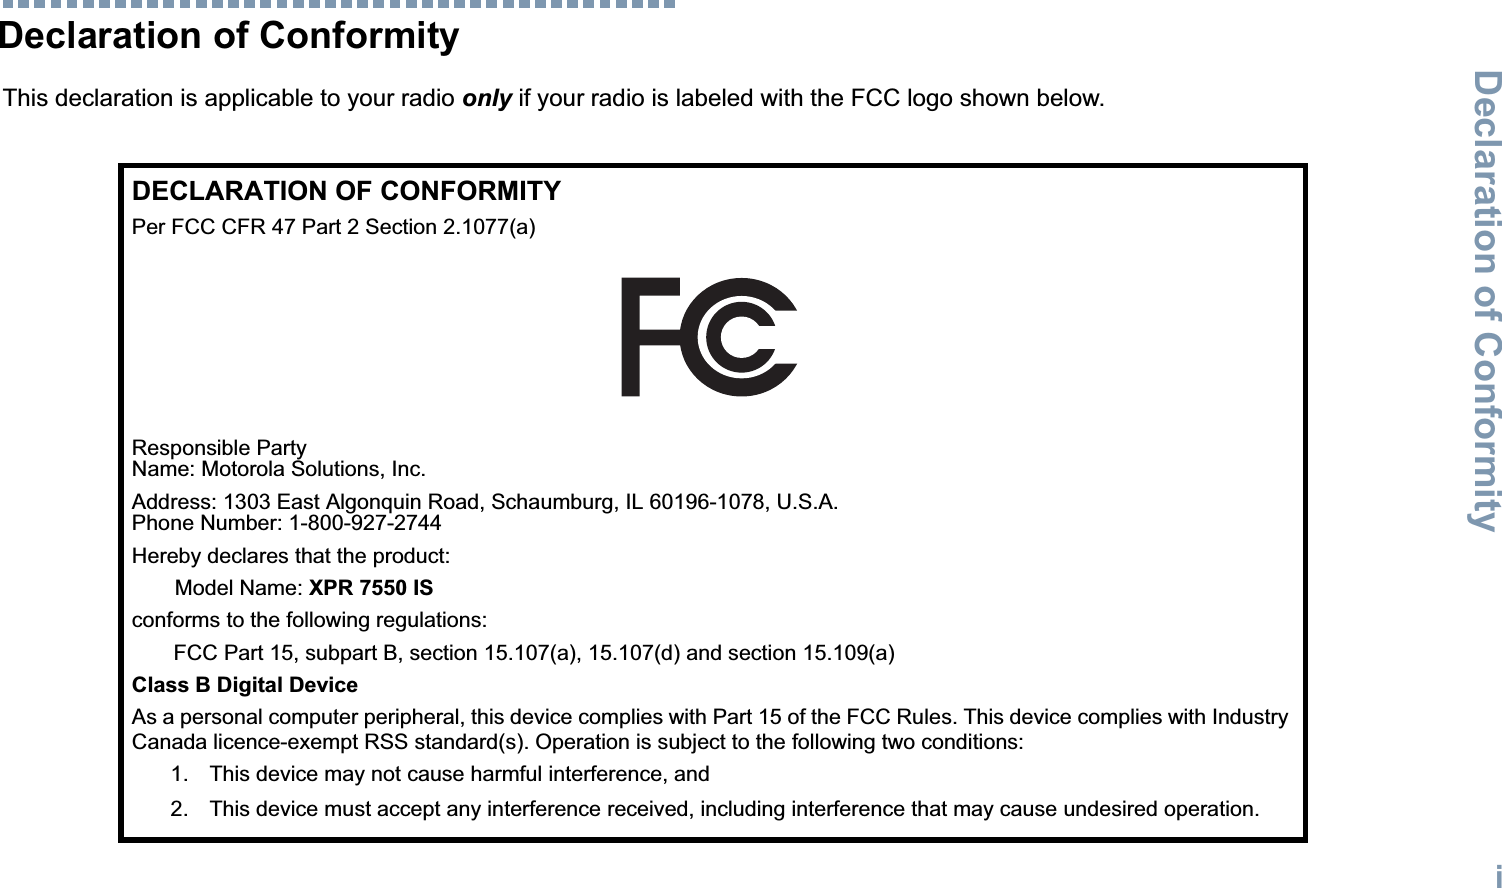 Declaration of ConformityEnglishiDeclaration of ConformityThis declaration is applicable to your radio only if your radio is labeled with the FCC logo shown below.DECLARATION OF CONFORMITYPer FCC CFR 47 Part 2 Section 2.1077(a)Responsible Party Name: Motorola Solutions, Inc.Address: 1303 East Algonquin Road, Schaumburg, IL 60196-1078, U.S.A.Phone Number: 1-800-927-2744Hereby declares that the product:Model Name: XPR 7550 ISconforms to the following regulations:FCC Part 15, subpart B, section 15.107(a), 15.107(d) and section 15.109(a)Class B Digital DeviceAs a personal computer peripheral, this device complies with Part 15 of the FCC Rules. This device complies with Industry Canada licence-exempt RSS standard(s). Operation is subject to the following two conditions:1. This device may not cause harmful interference, and 2. This device must accept any interference received, including interference that may cause undesired operation.